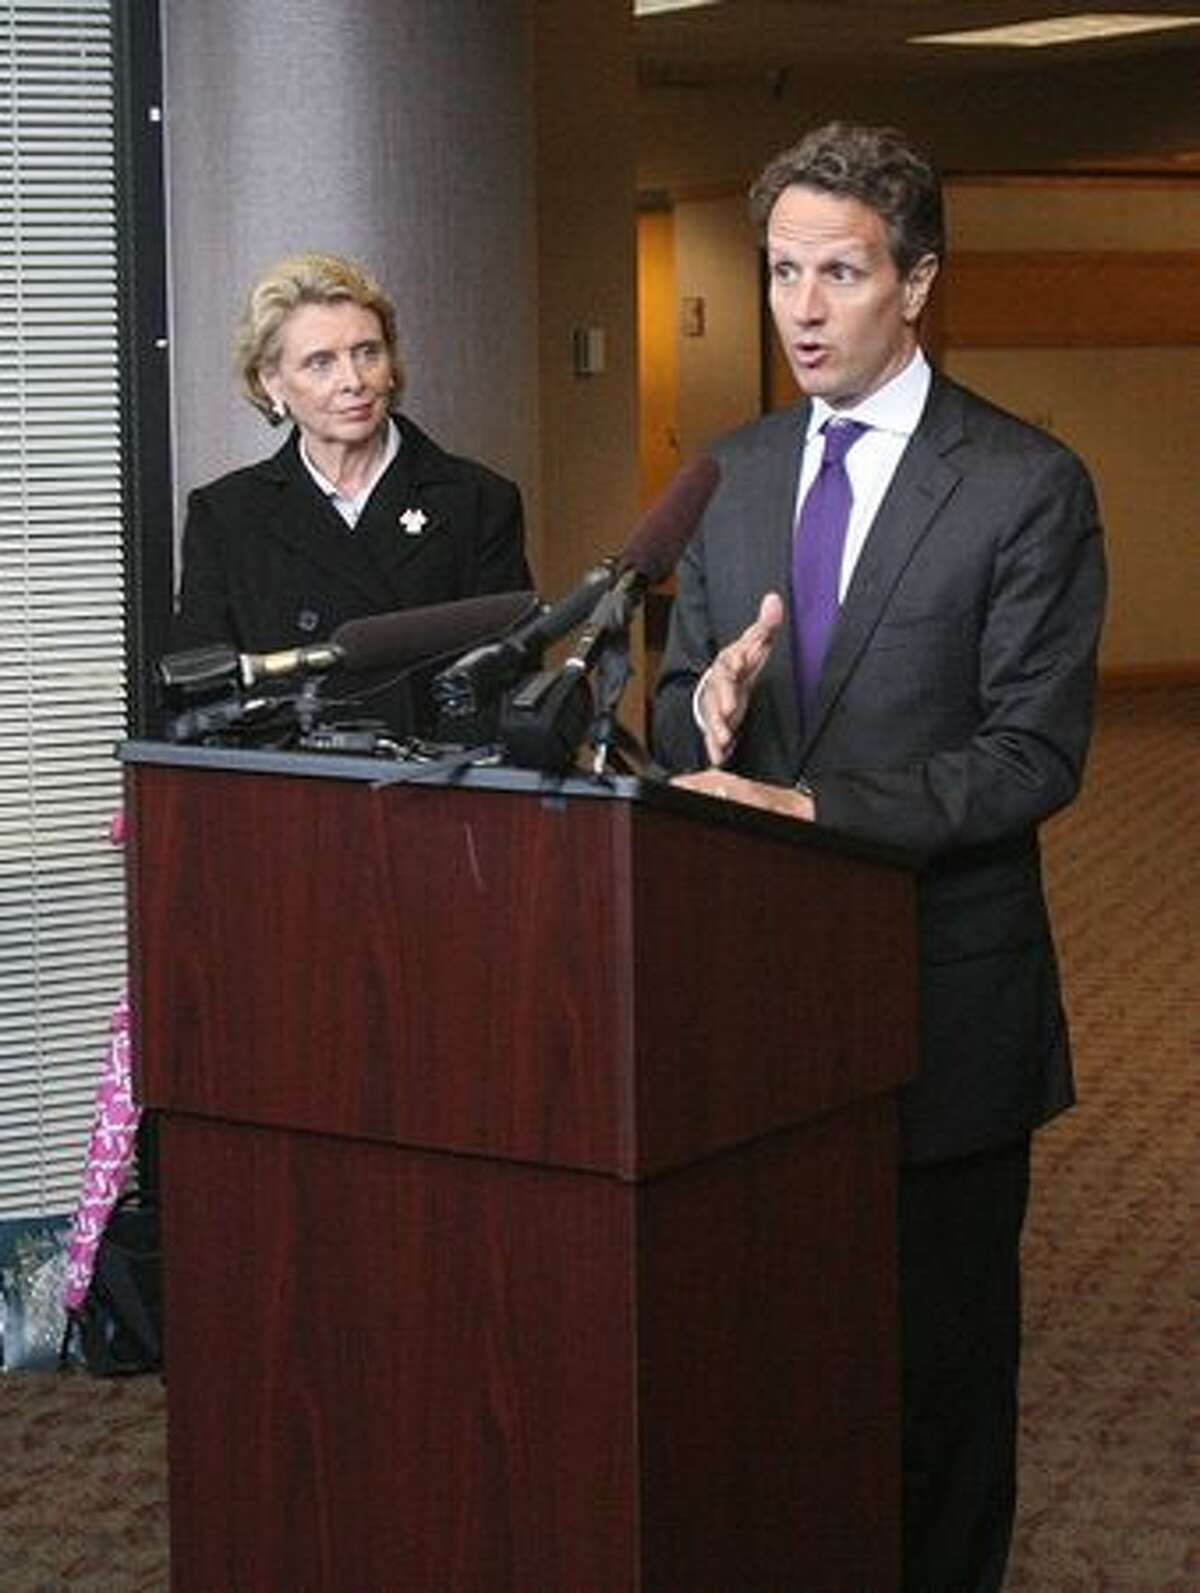 Treasury Secretary Tim Geithner talks about trade at the Port of Tacoma while Washington Gov. Chris Gregoire listens.